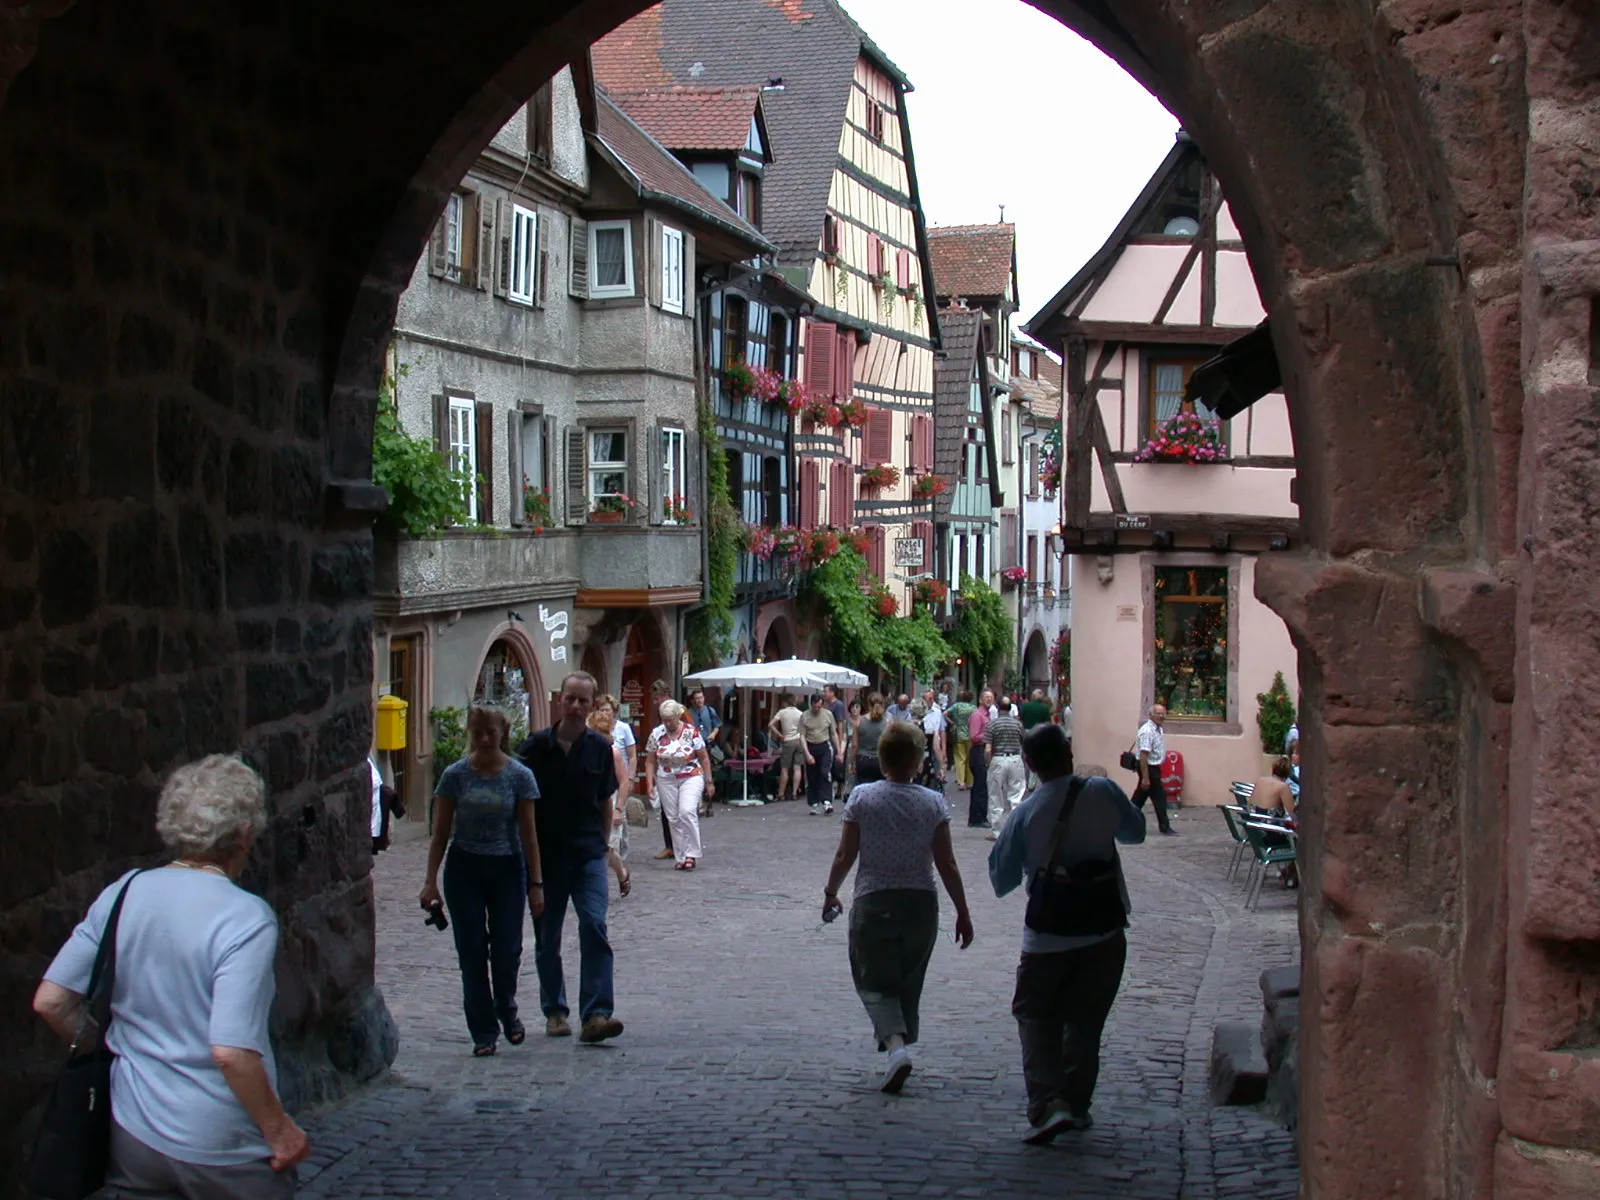 Photo showing: View from the Dolder, Riquewihr, France

Photograph: Mschlindwein, on June 27, 2005